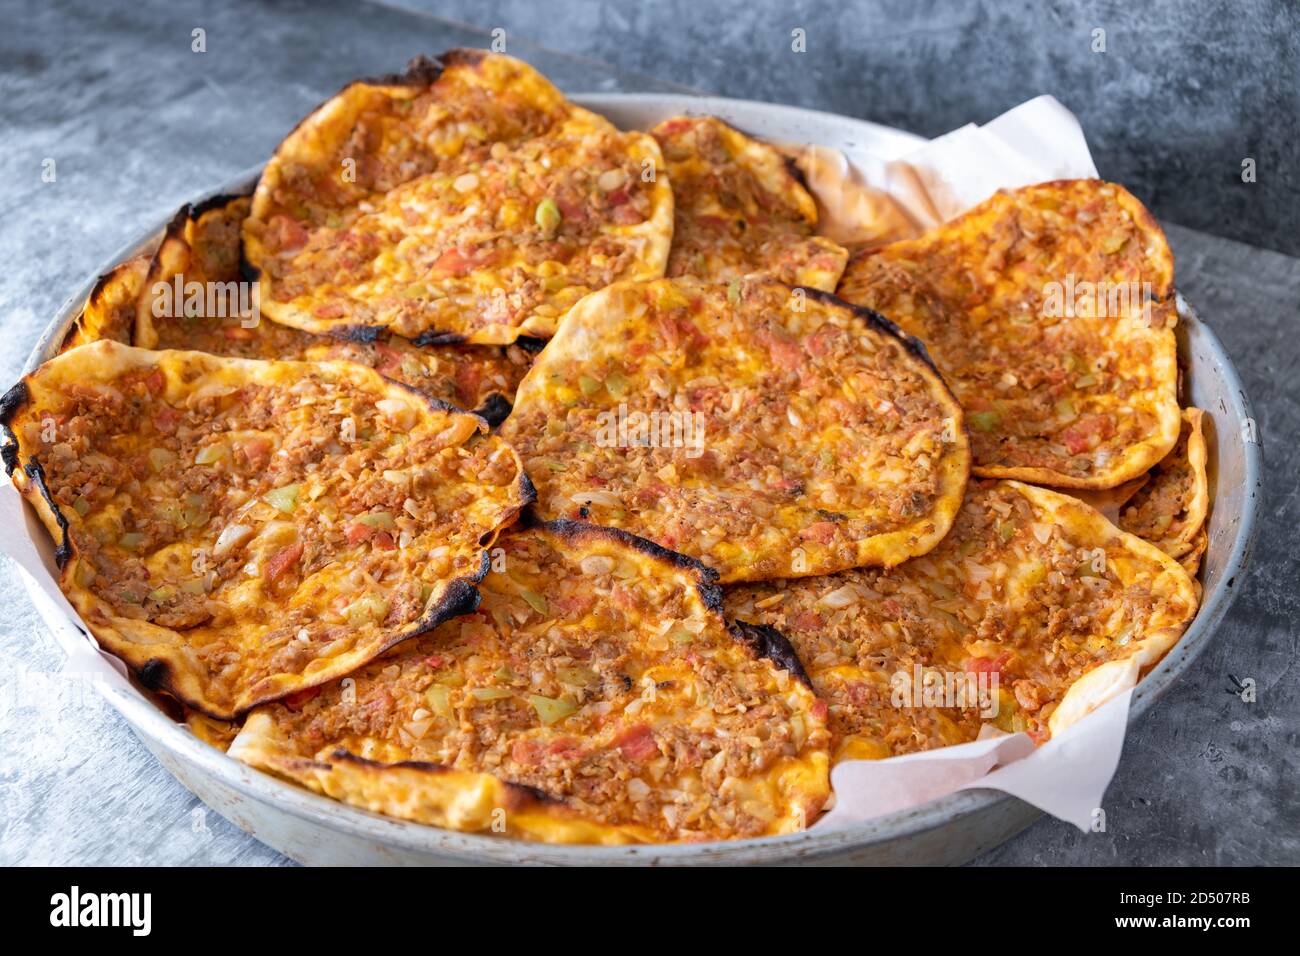 Traditional delicious Turkish foods; Lahmacun (Turkish pizza). Homemade lahmacun during the lockdown Stock Photo